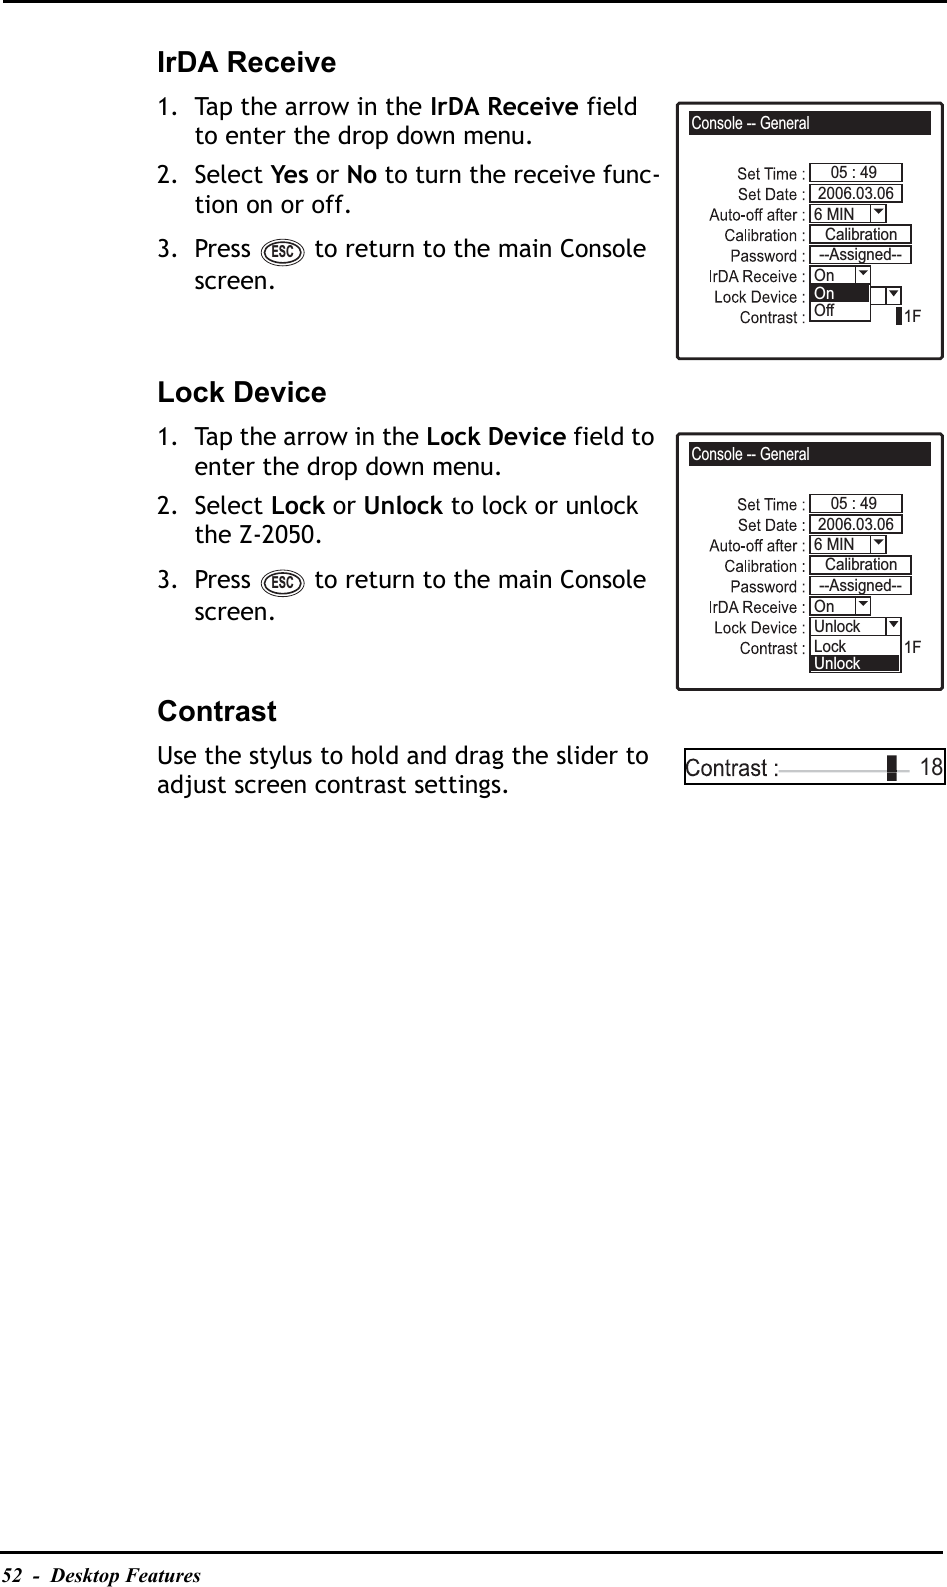 52  -  Desktop FeaturesIrDA Receive1. Tap the arrow in the IrDA Receive field to enter the drop down menu.2. Select Yes or No to turn the receive func-tion on or off.3. Press   to return to the main Console screen.Lock Device1. Tap the arrow in the Lock Device field to enter the drop down menu.2. Select Lock or Unlock to lock or unlock the Z-2050.3. Press   to return to the main Console screen.ContrastUse the stylus to hold and drag the slider to adjust screen contrast settings.Console -- General05 : 491F6 MIN2006.03.06On--Assigned--CalibrationUnlockOffOnESCConsole -- General05 : 491F6 MIN2006.03.06On--Assigned--CalibrationUnlockLockUnlockESC18